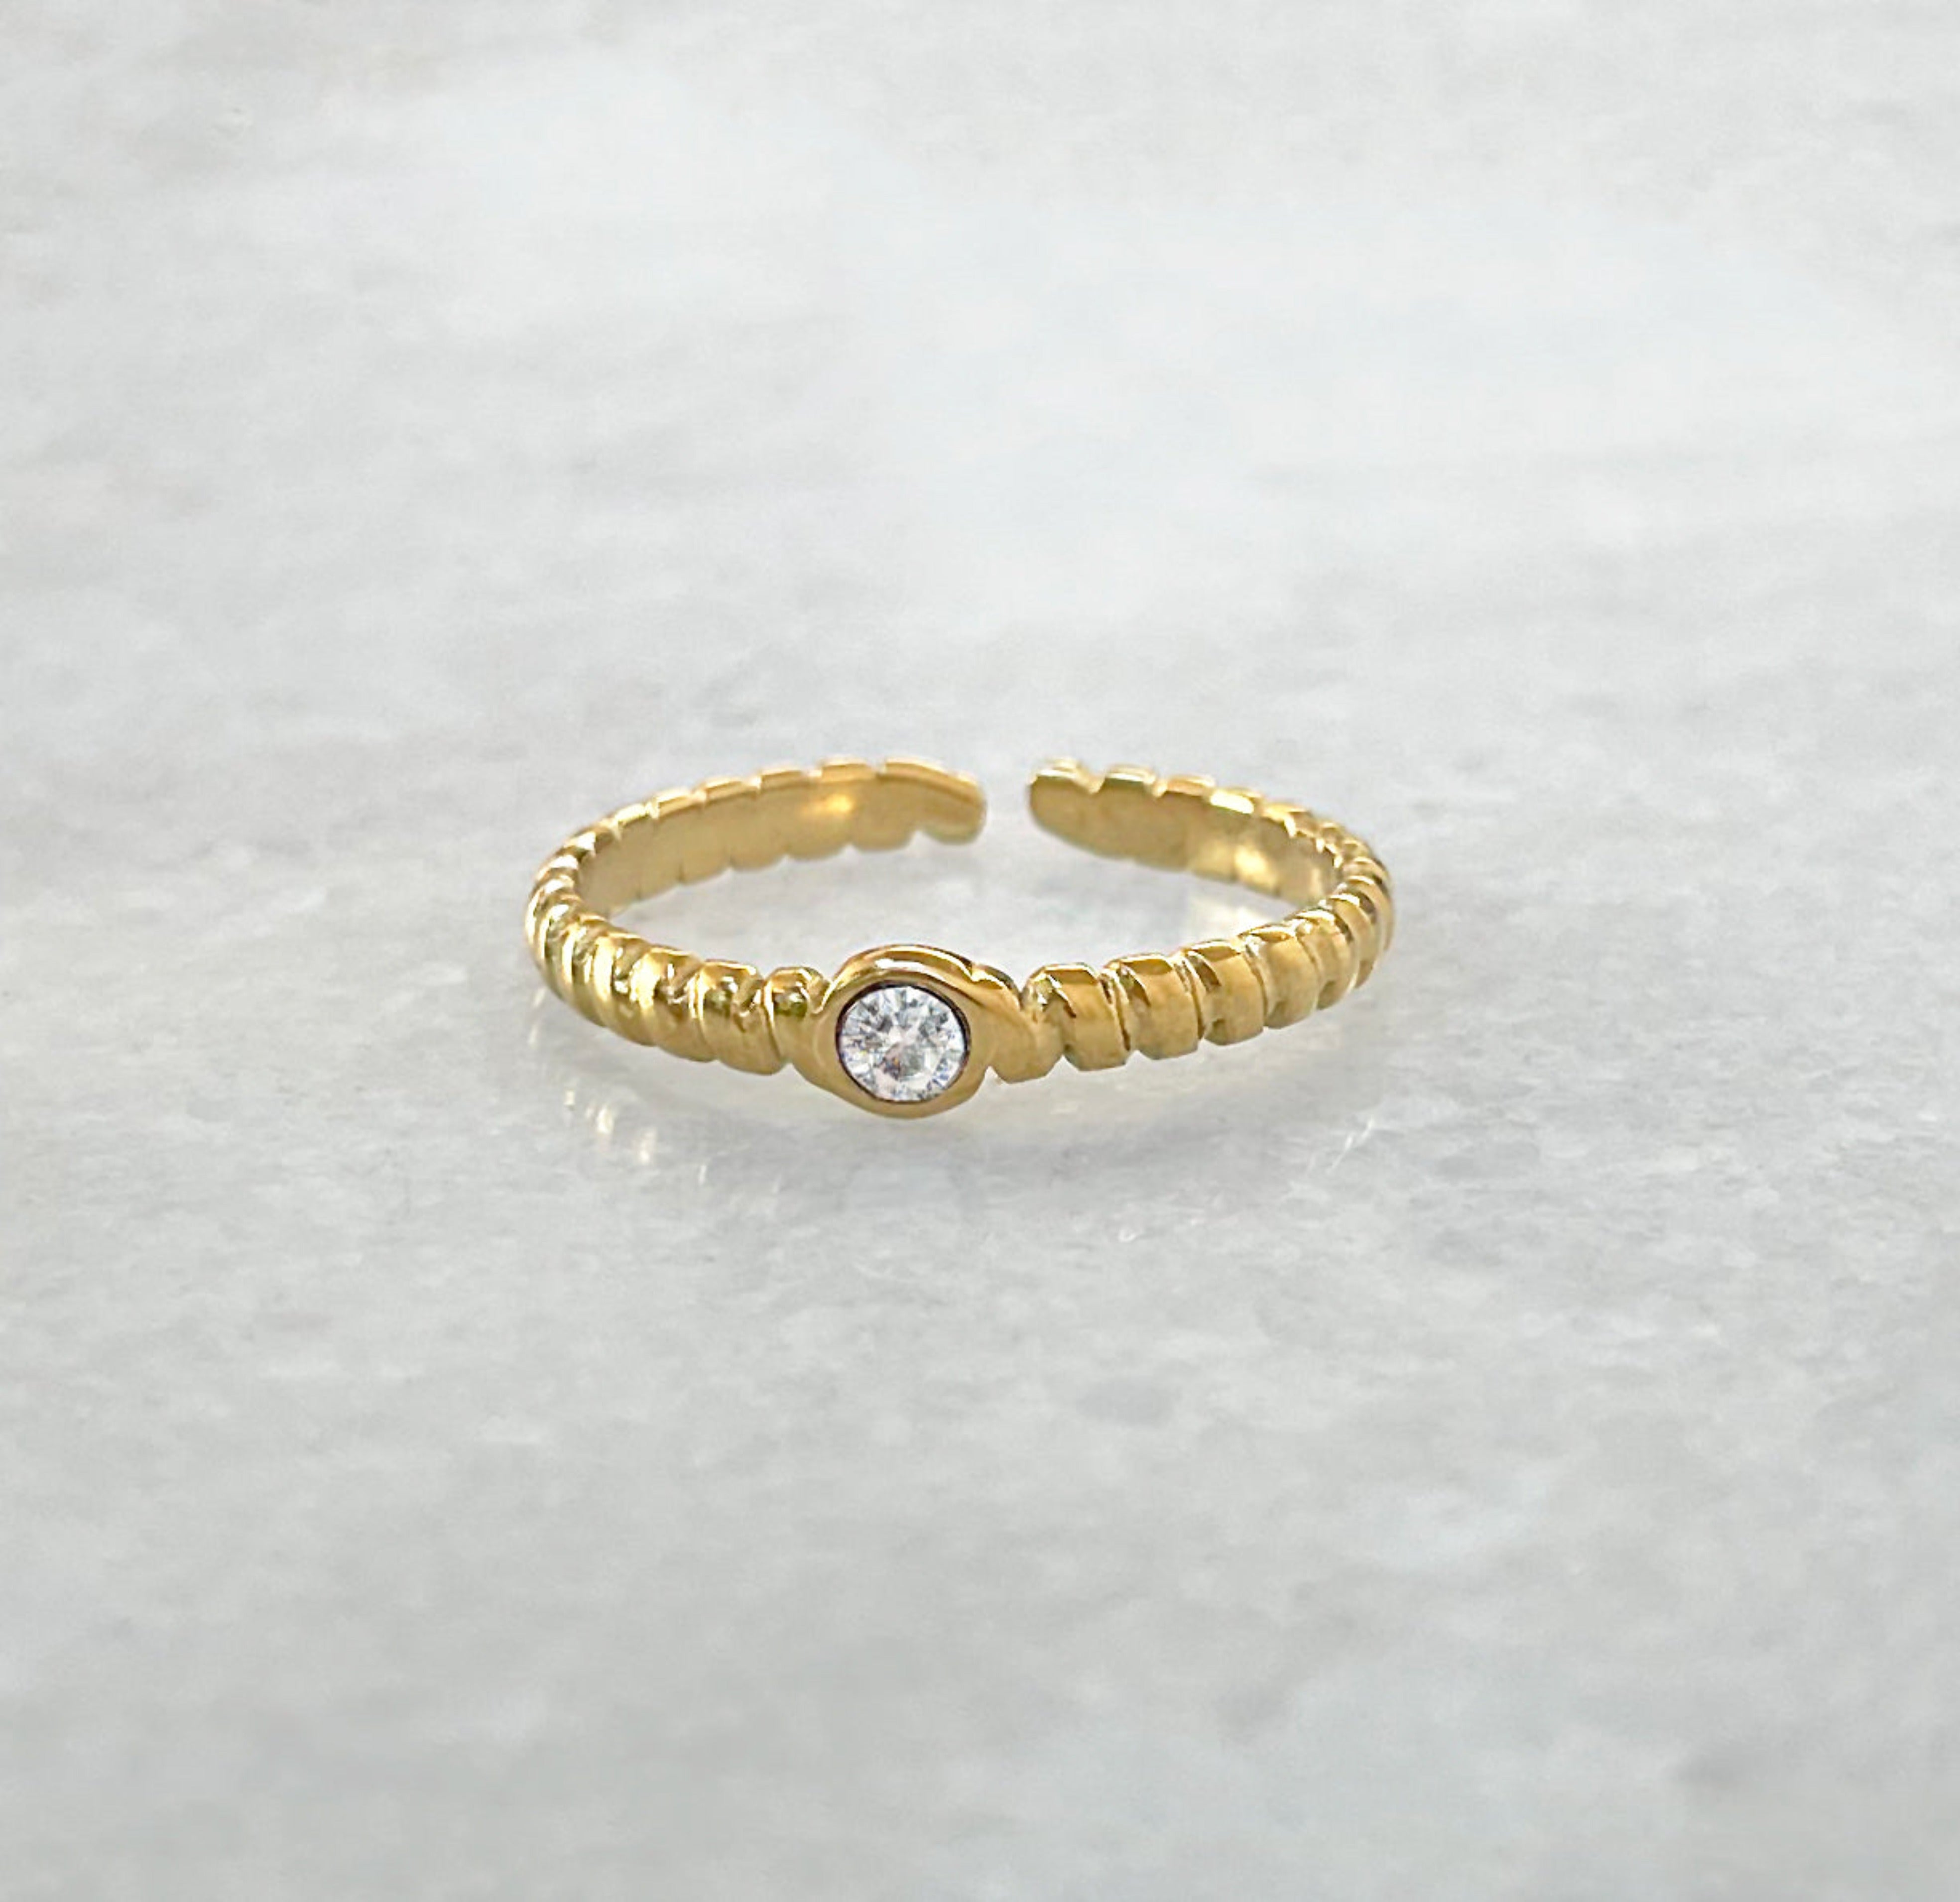 Helena gold adjustable solitaire ring paired with Daphne pave ring, and Carrie ring band. Gold waterproof jewelry